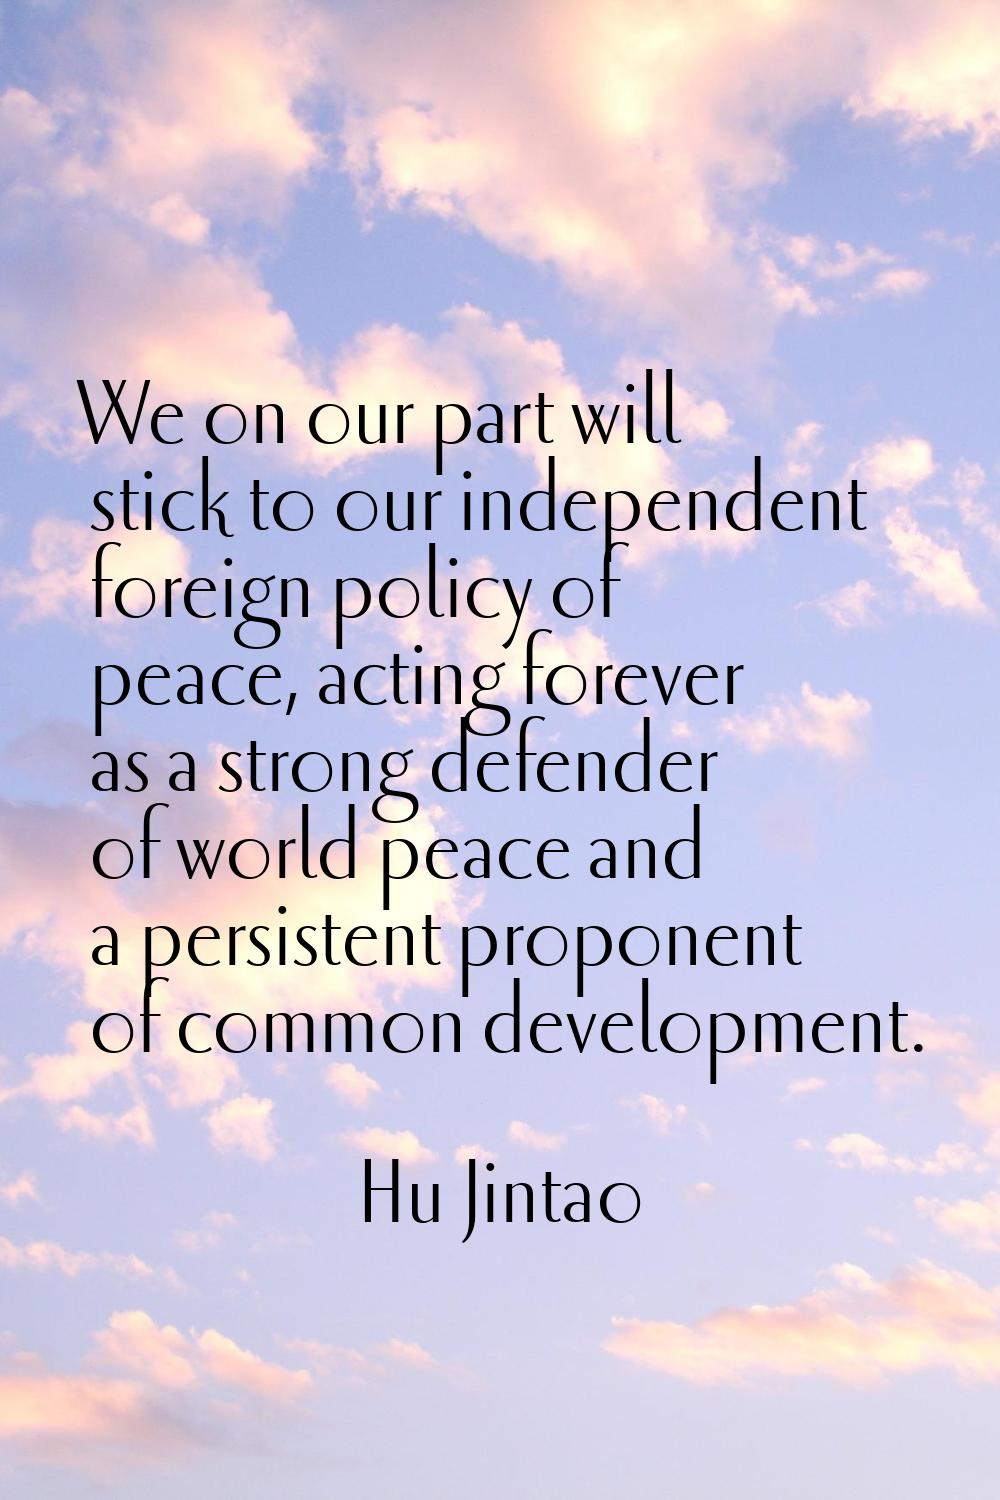 We on our part will stick to our independent foreign policy of peace, acting forever as a strong de